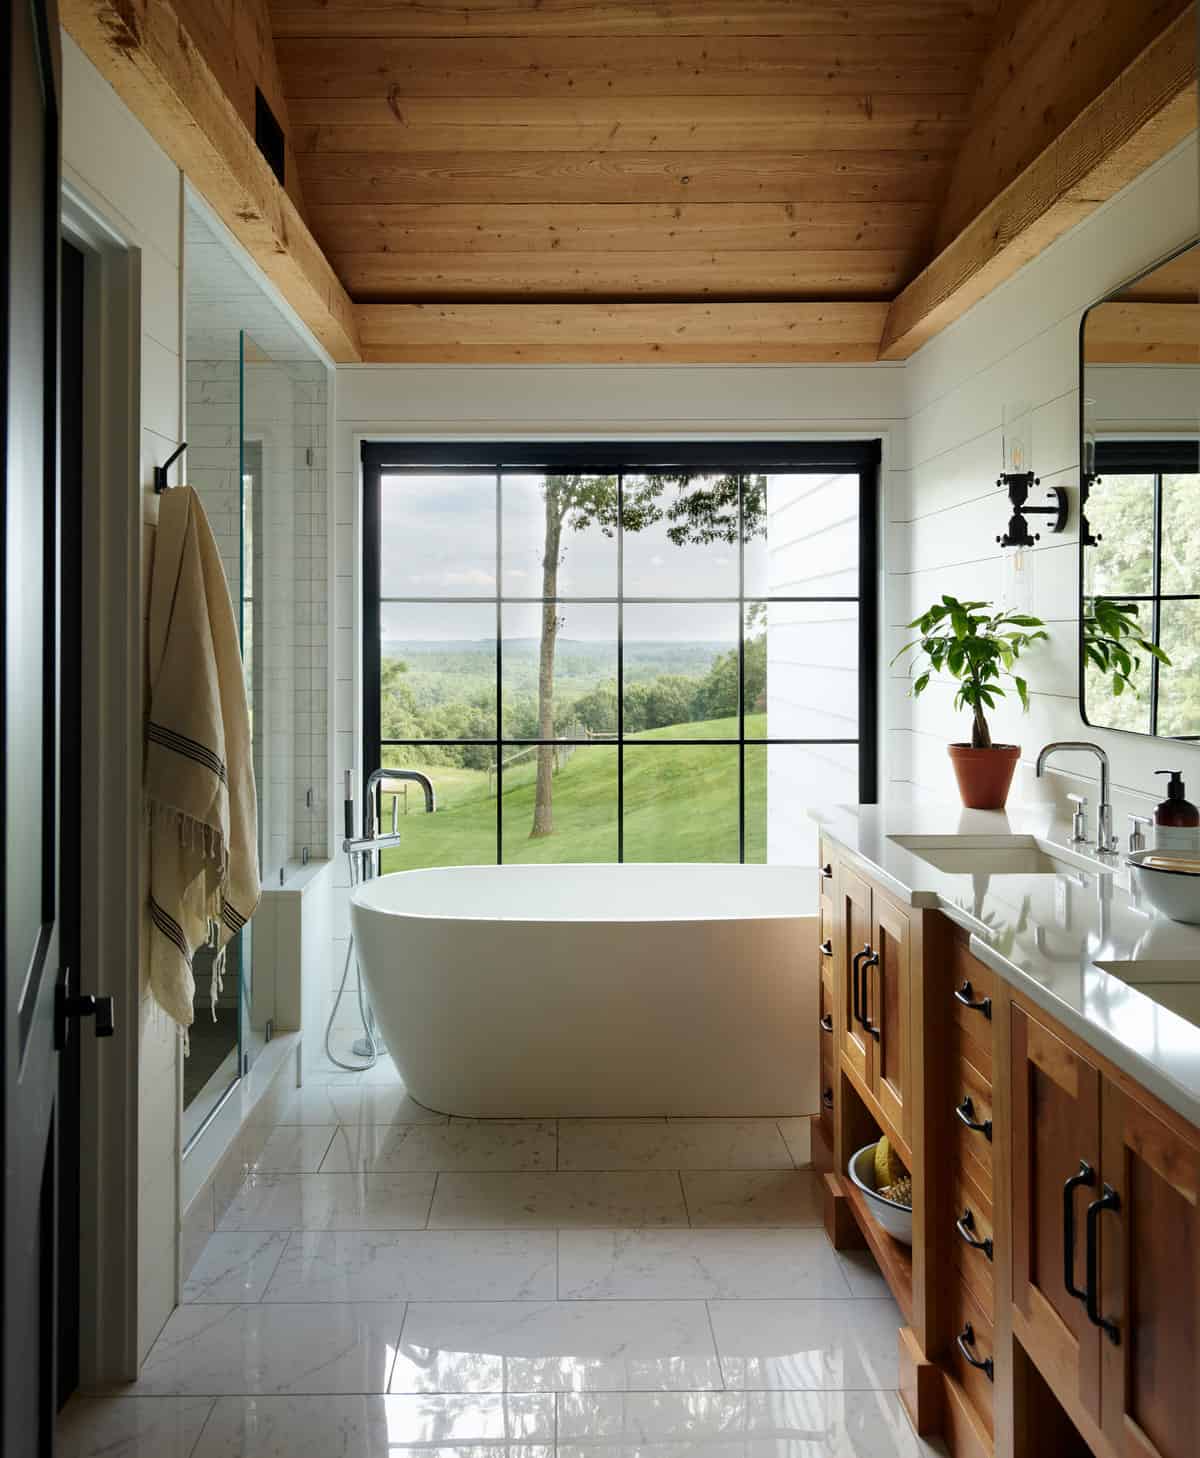 22-Master-Bath-AFTER. All fixtures, except the vanity, were rearranged. A separate water closet was created. A new vaulted, wood paneled ceiling lightens, yet warms, the space.  A floor to ceiling feature window frames the view.